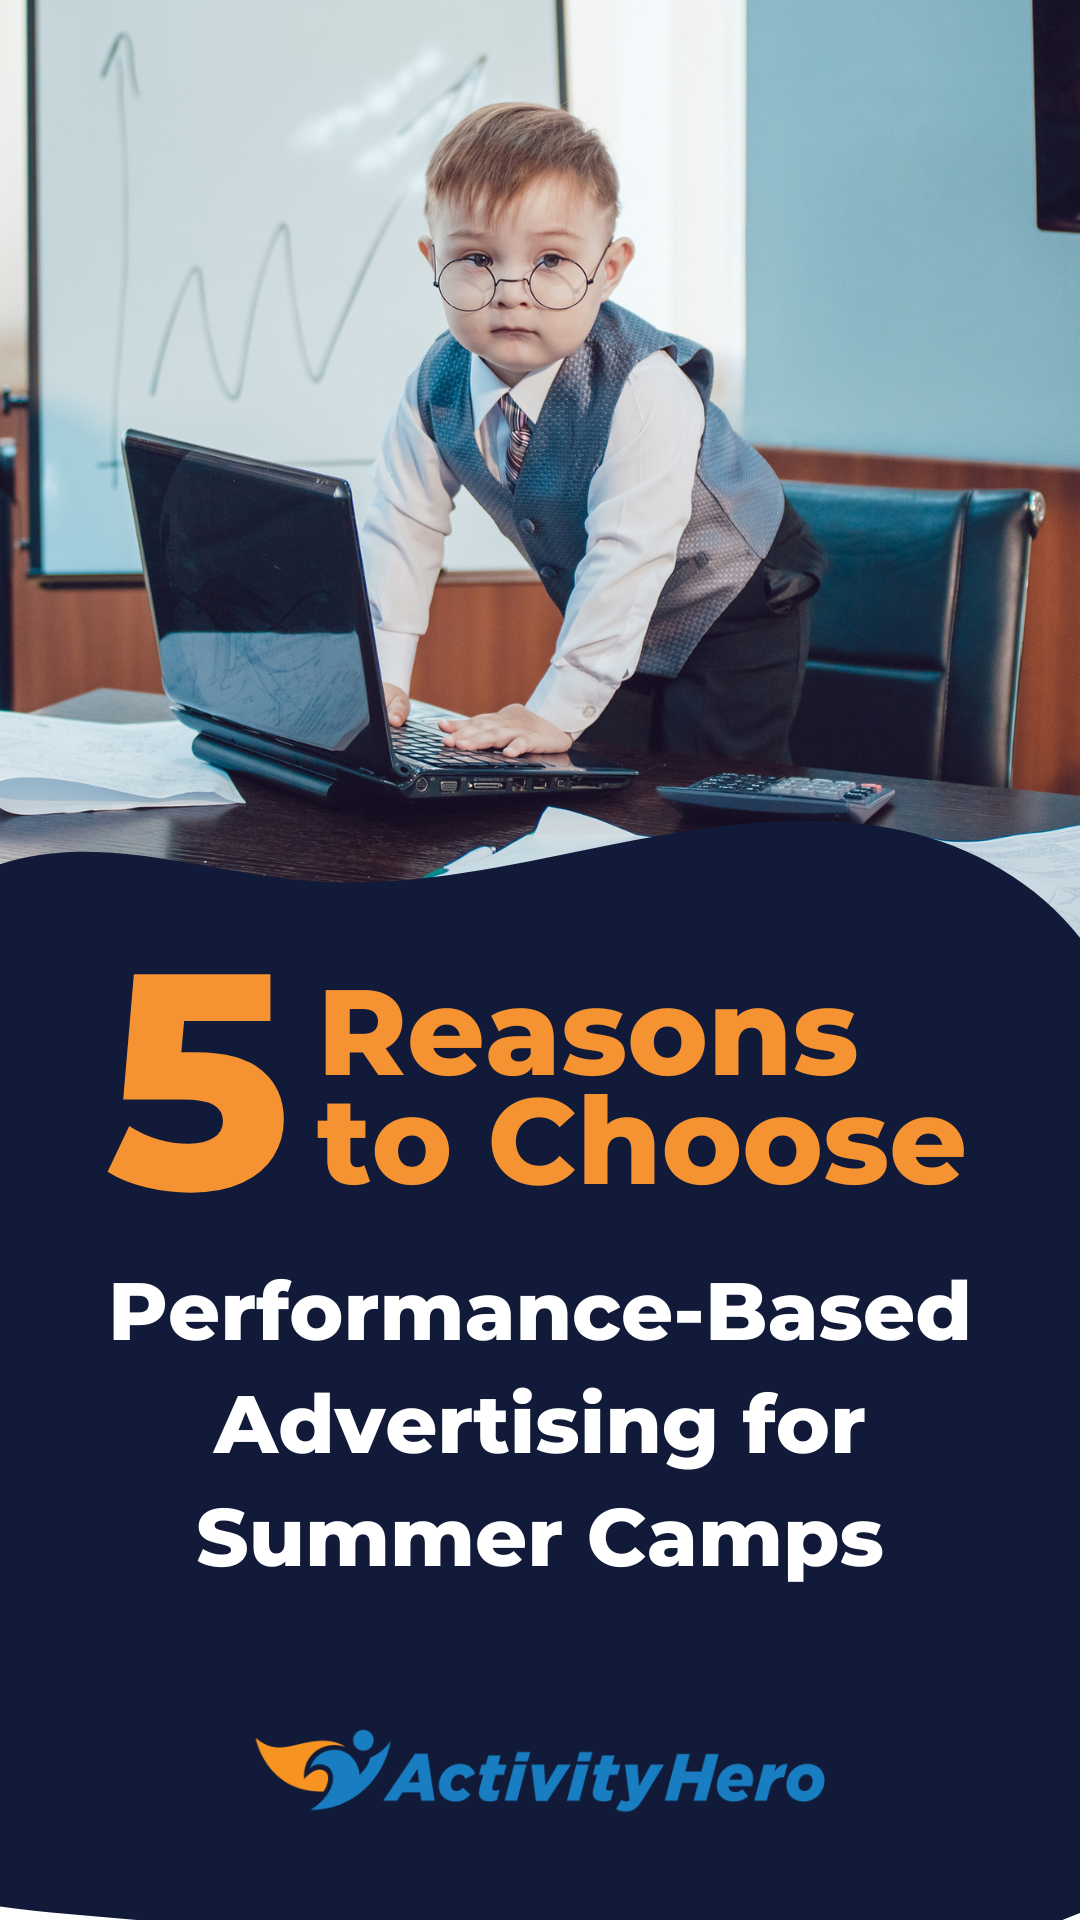 5 Reasons to Choose Performance-Based Advertising for Summer Camps